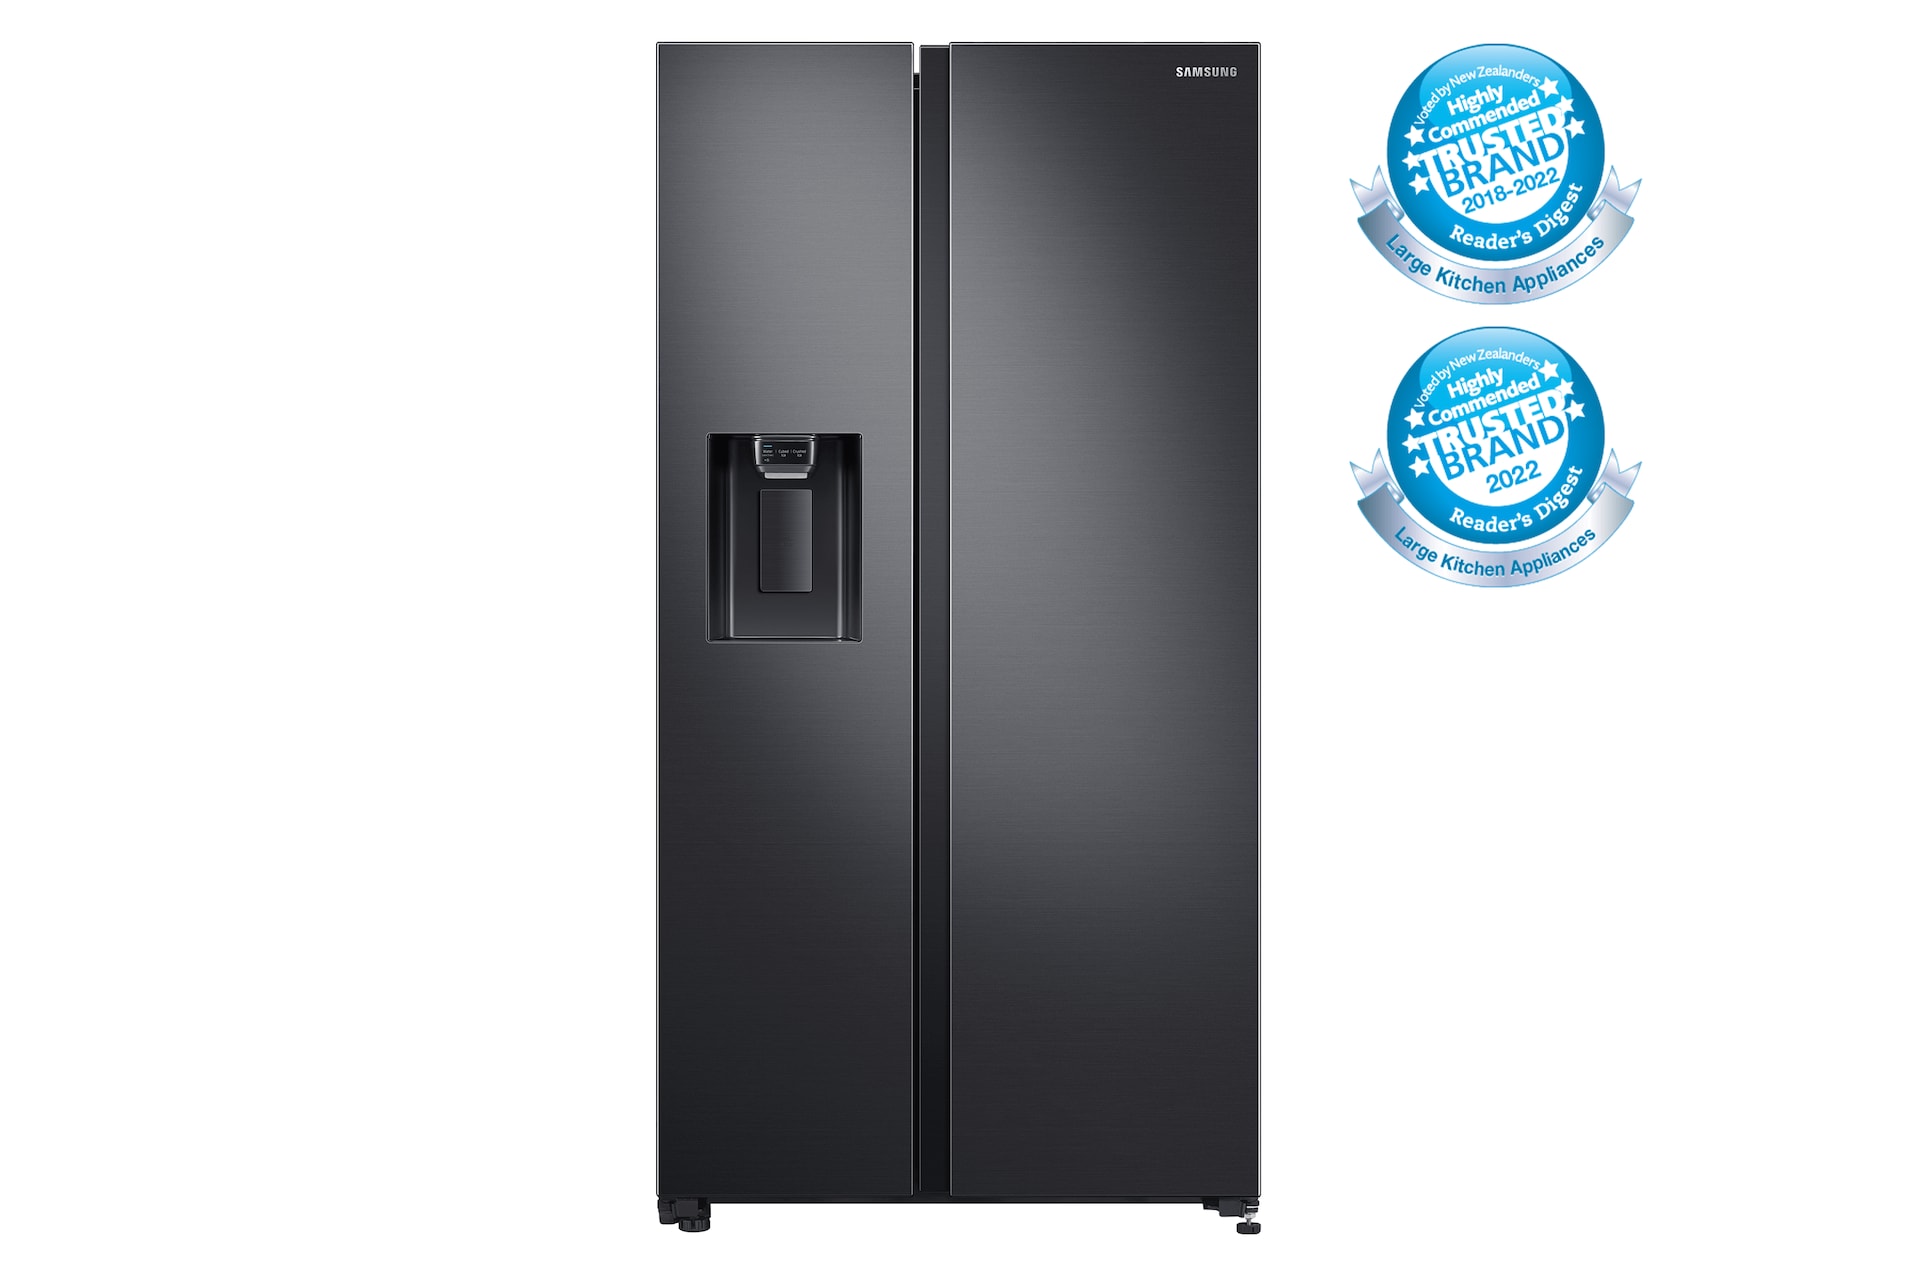 Front view of the Samsung 635L Side By Side Fridge (SRS672DMB) in Black colour.